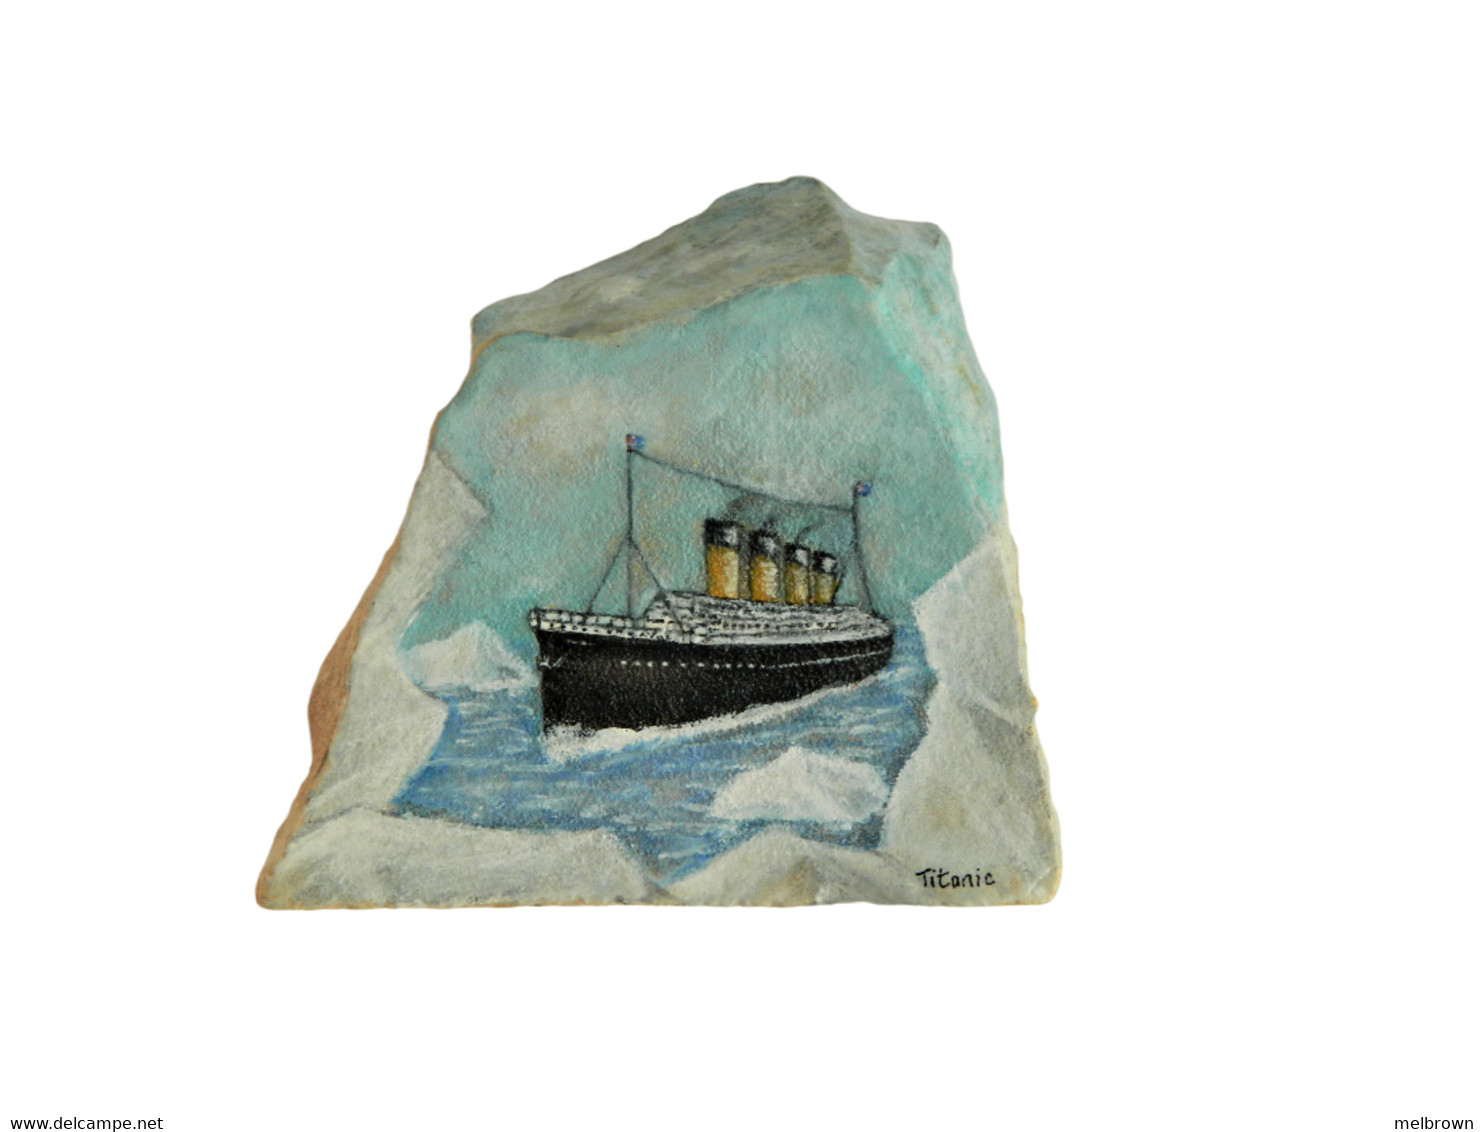 Original Painting Of The Titanic Hand Painted On A Spanish Tosca Stone Paperweight - Maritime Dekoration